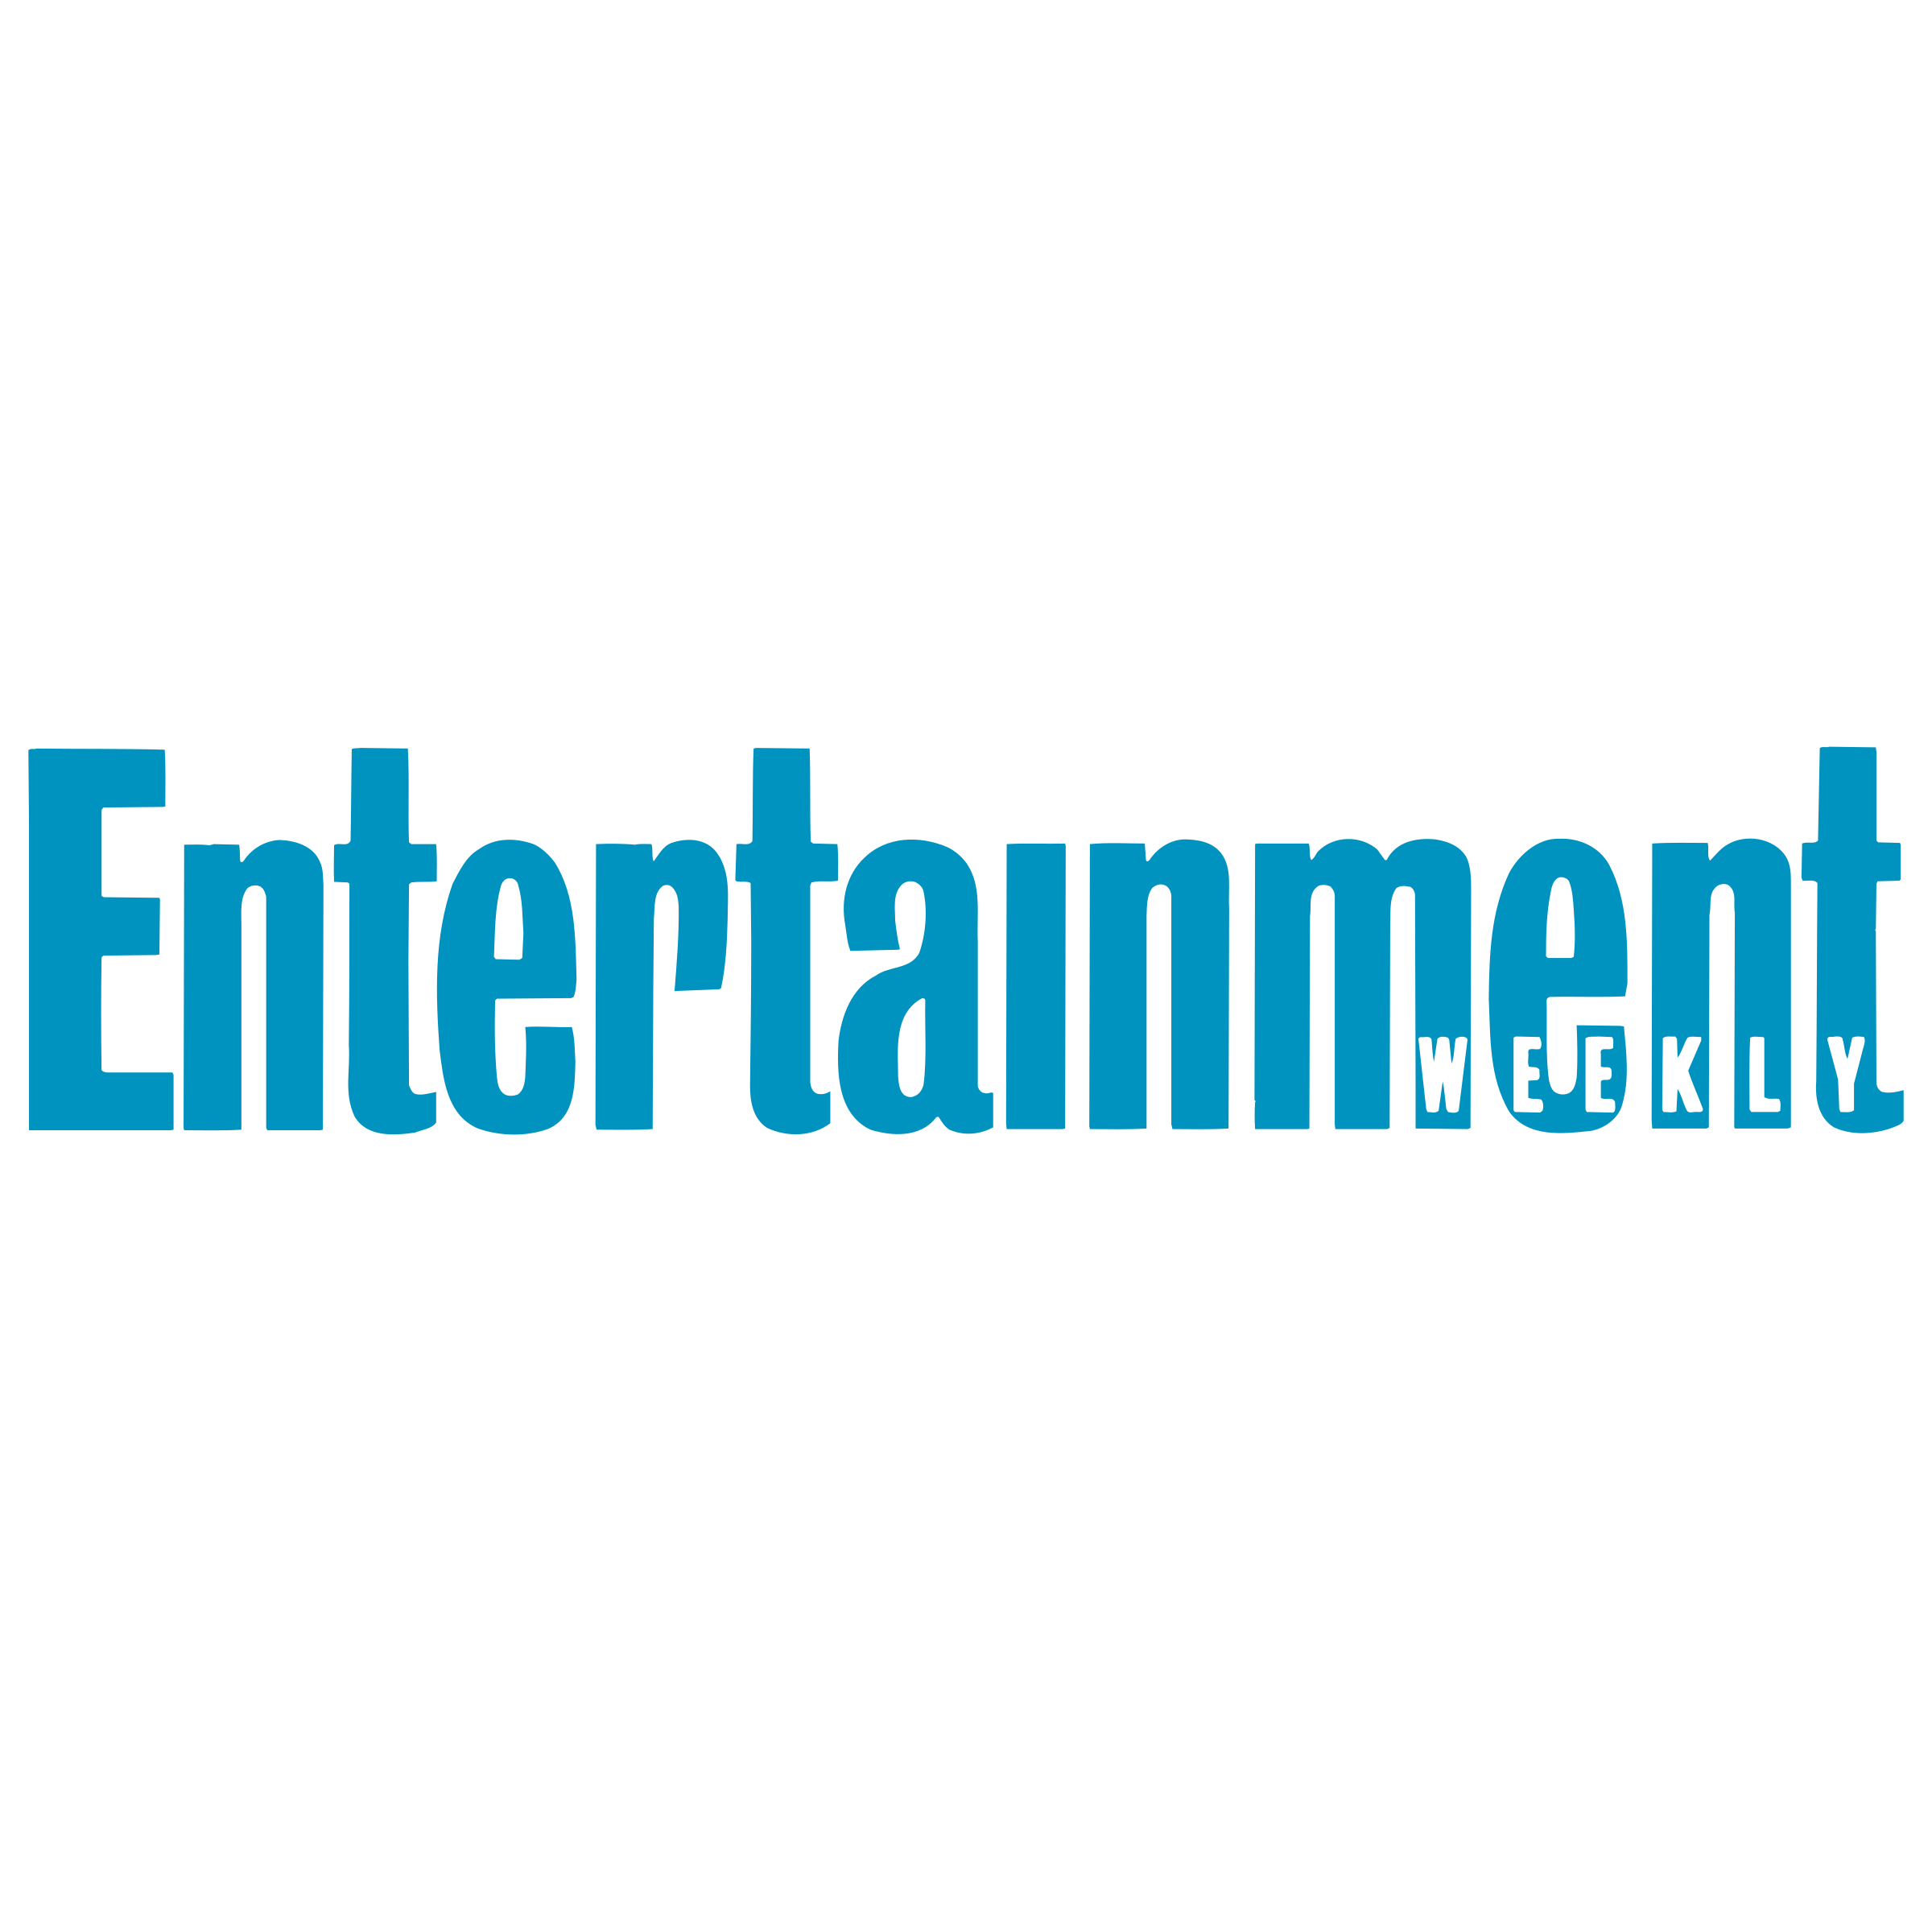 entertainment-weekly-logo-png-transparent.png